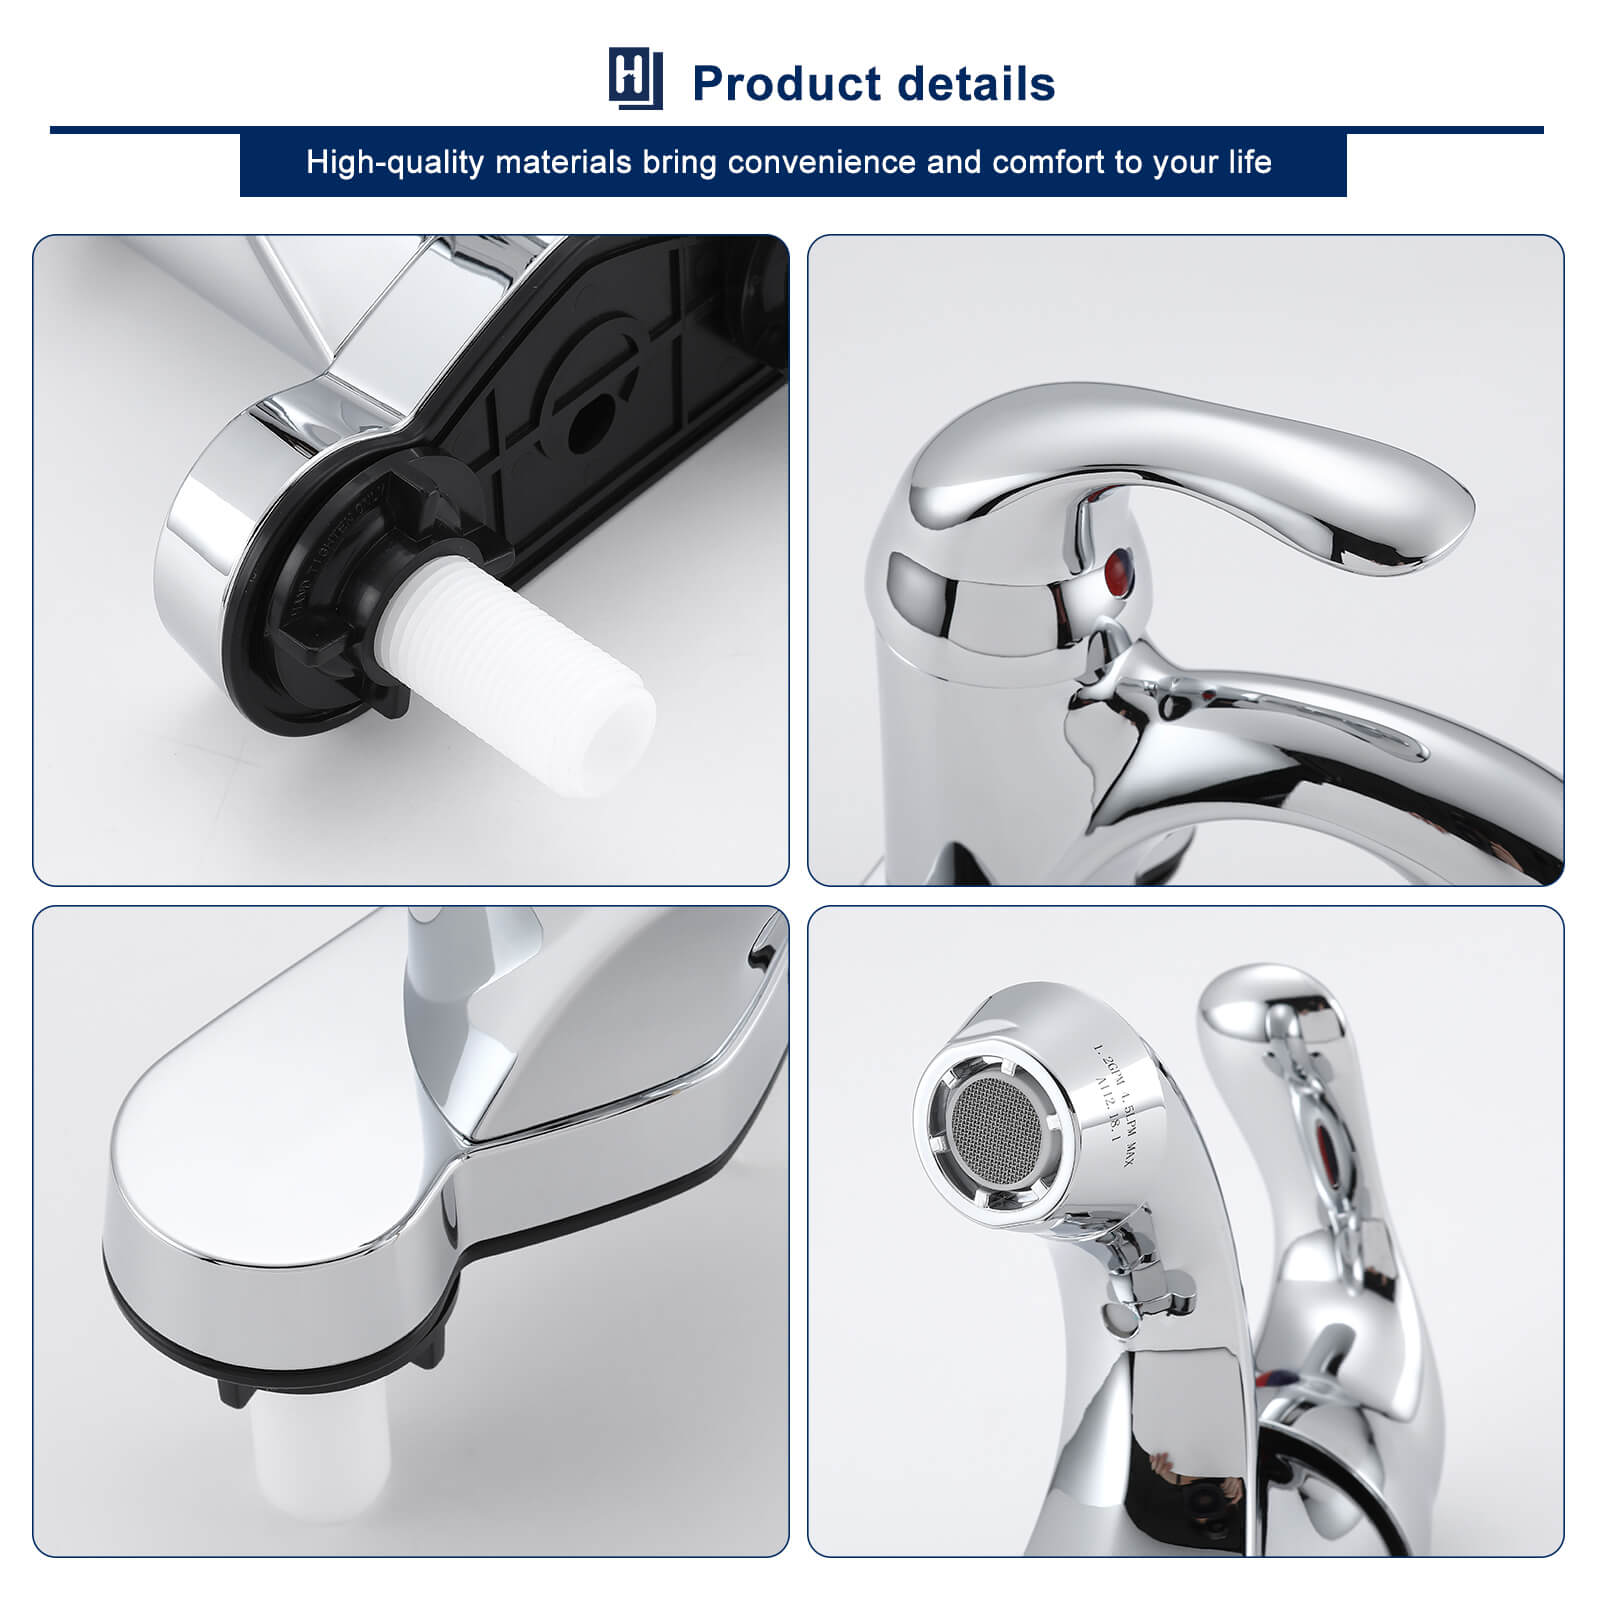 HOMELODY Plastic Bathroom Faucet 4 inch Centerset